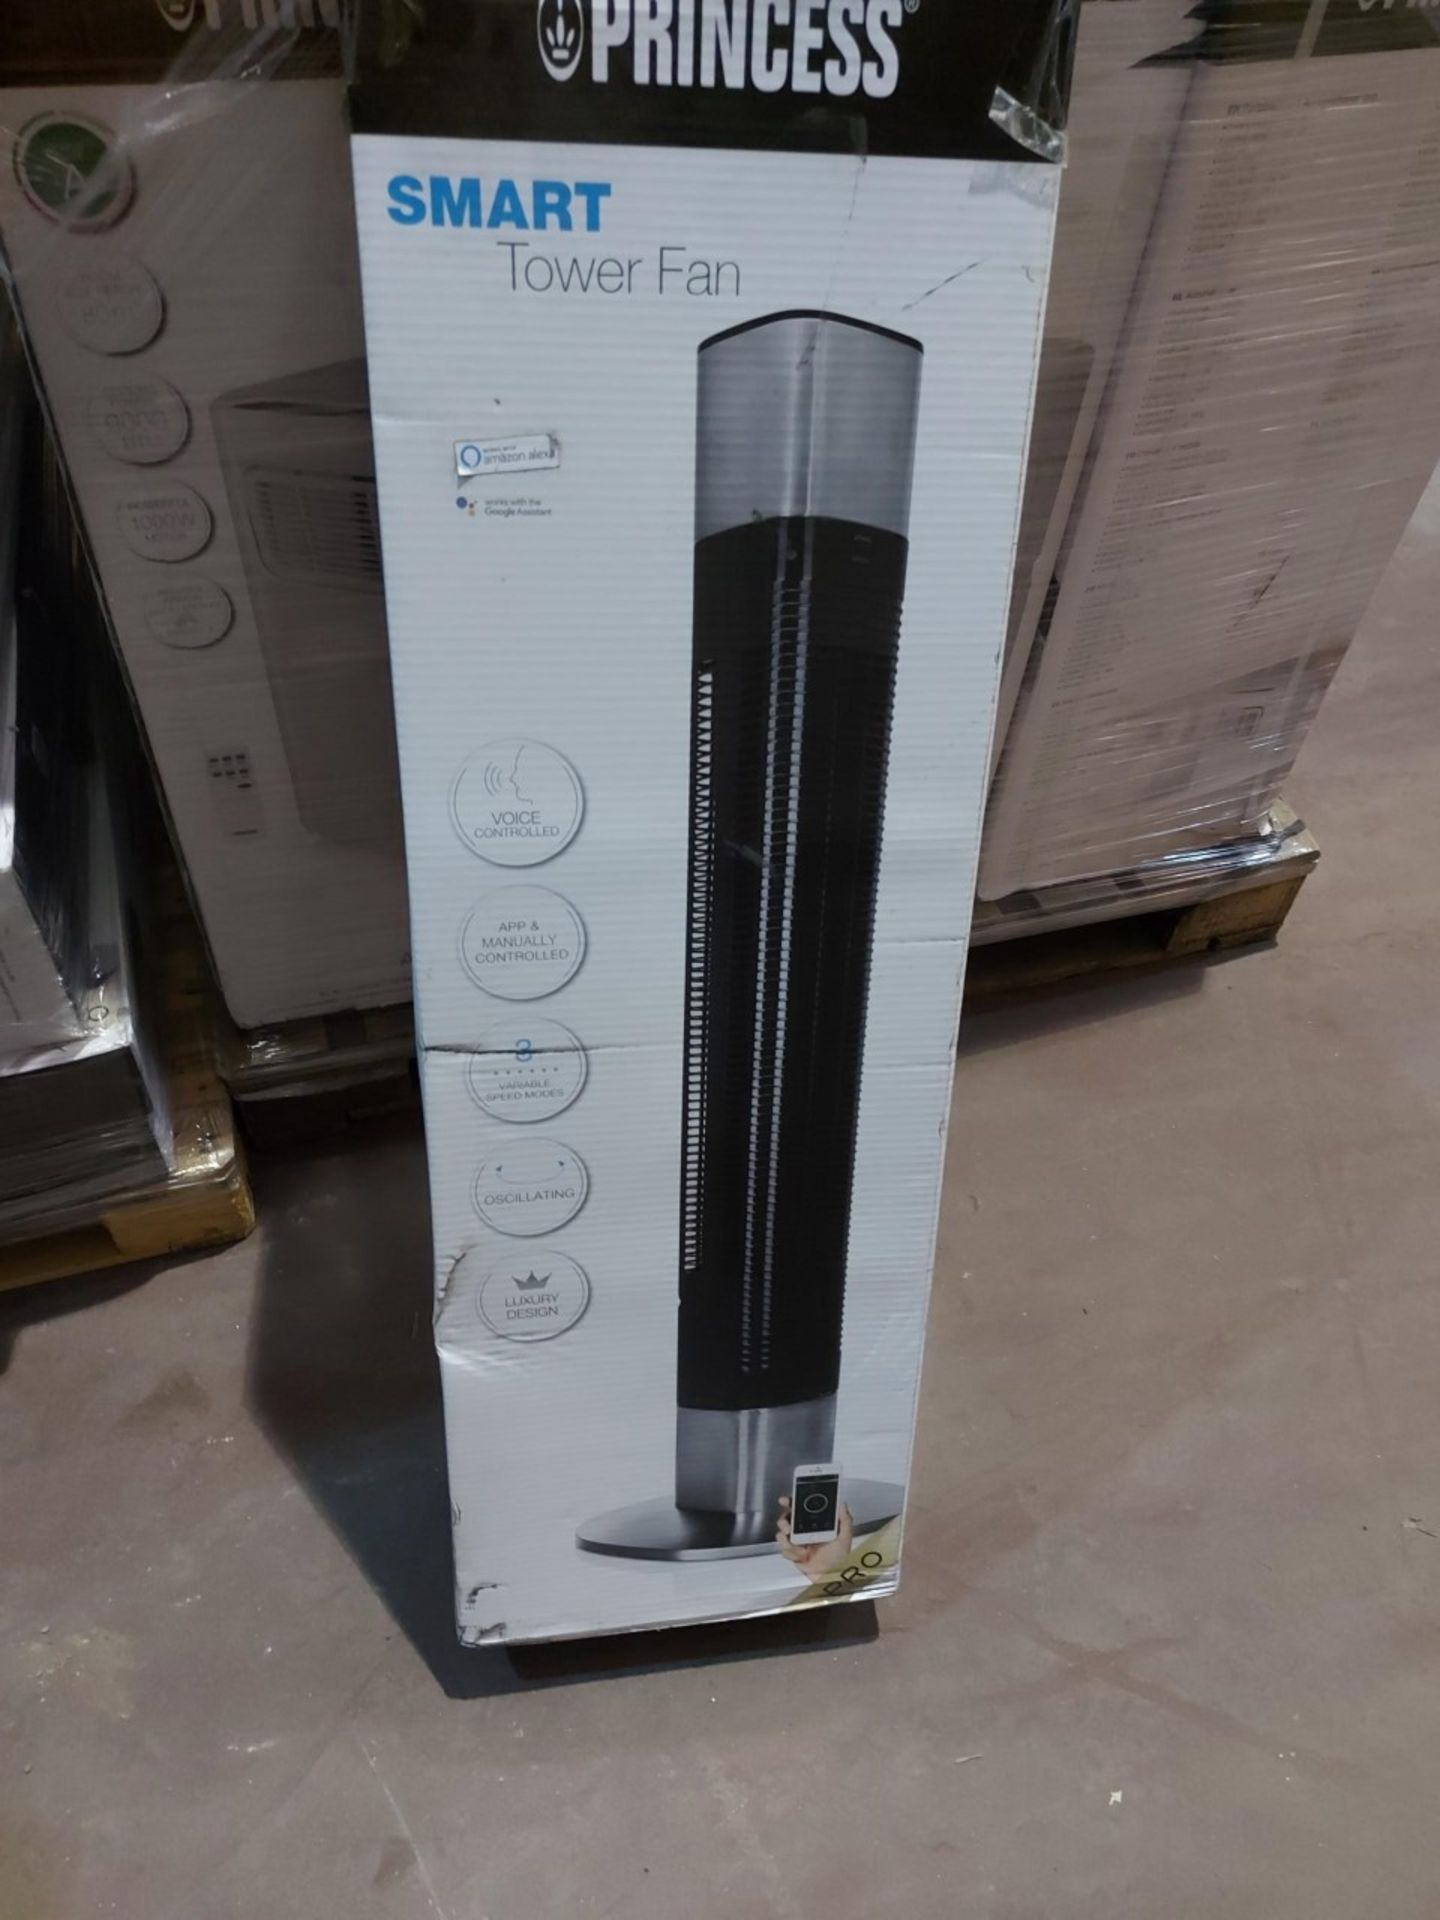 4 x PRINCESS 350000 Smart Tower Fan - Black. RRP £119.99 EACH. Control remotely from your phone 3 - Image 2 of 2